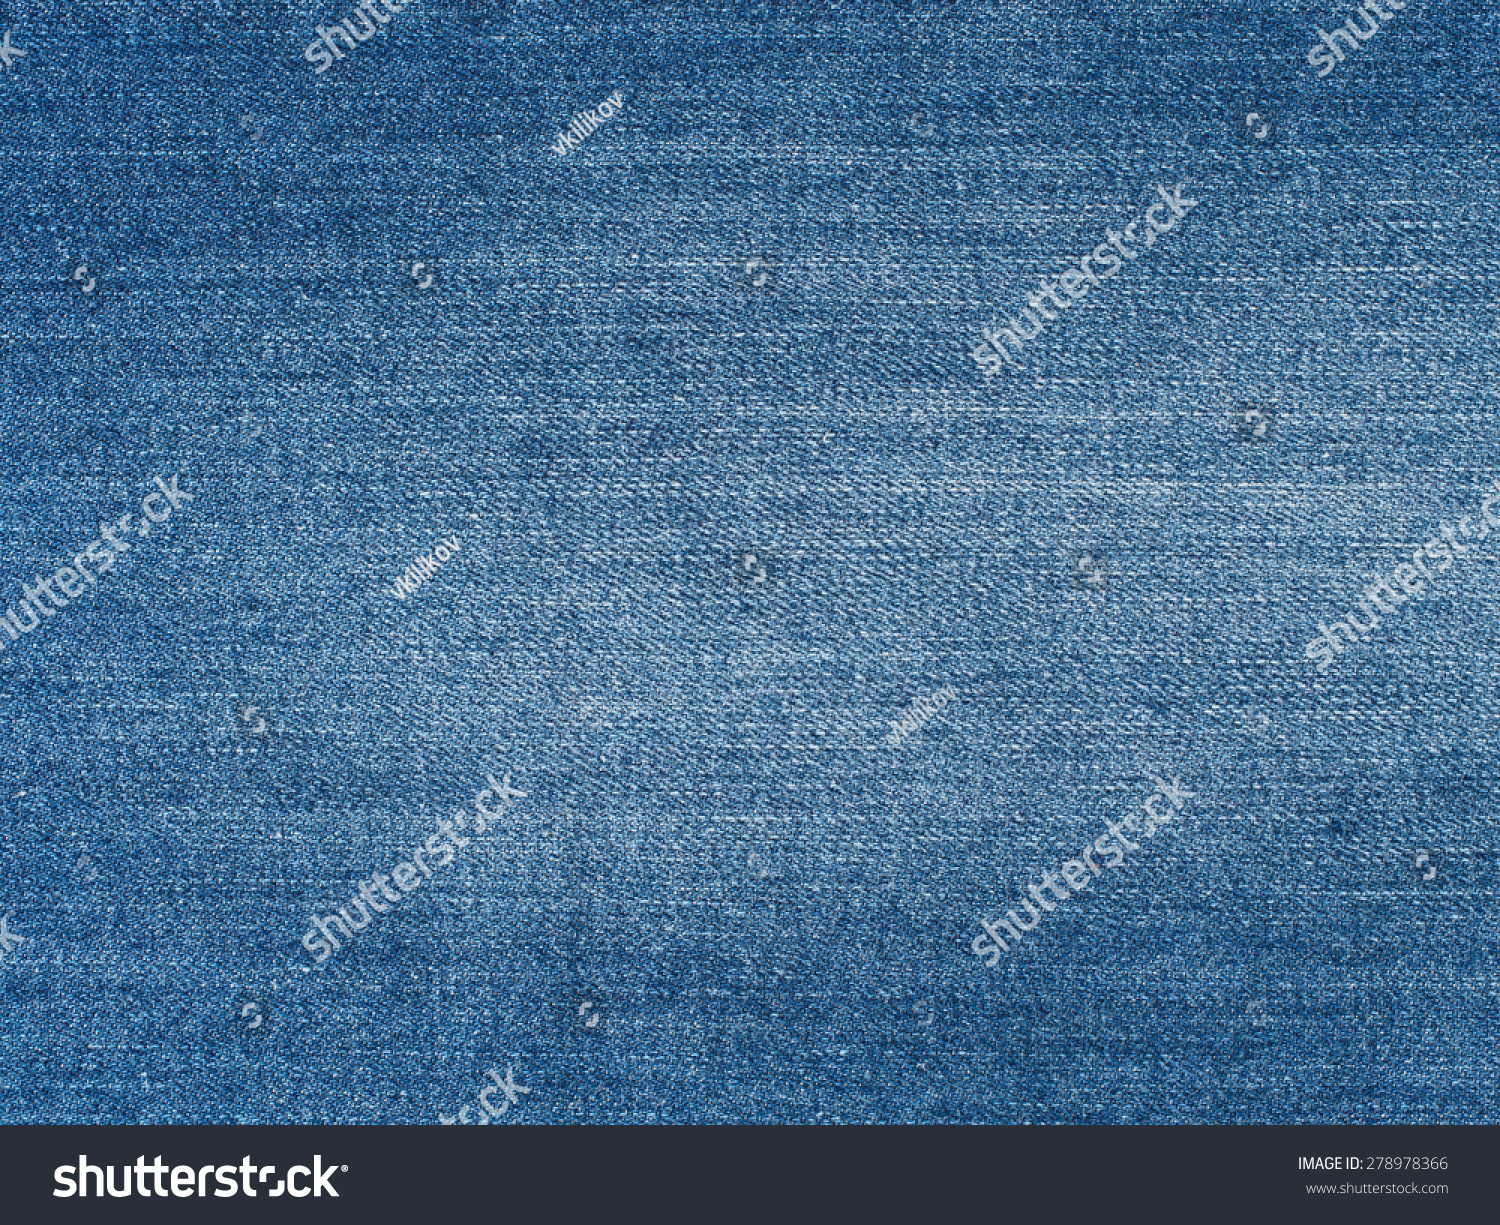 Blue Washed Denim Jeans Fabric Texture Stock Photo 278978366 - Shutterstock